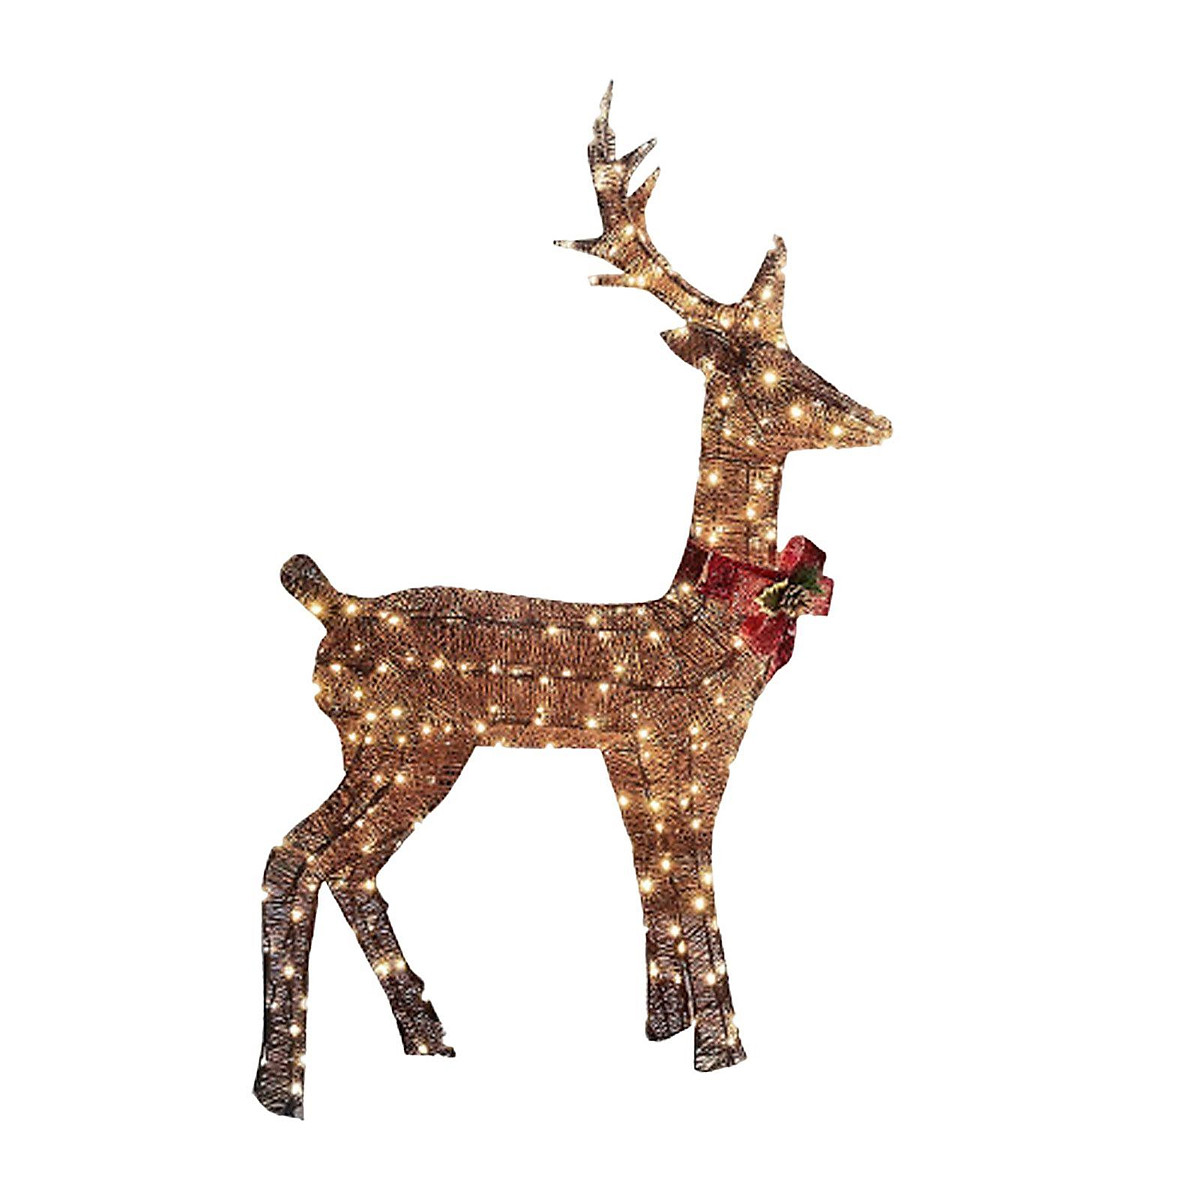 Mua 2pcs Christmas Lighted Reindeer Ornament for Festive Party tại ...